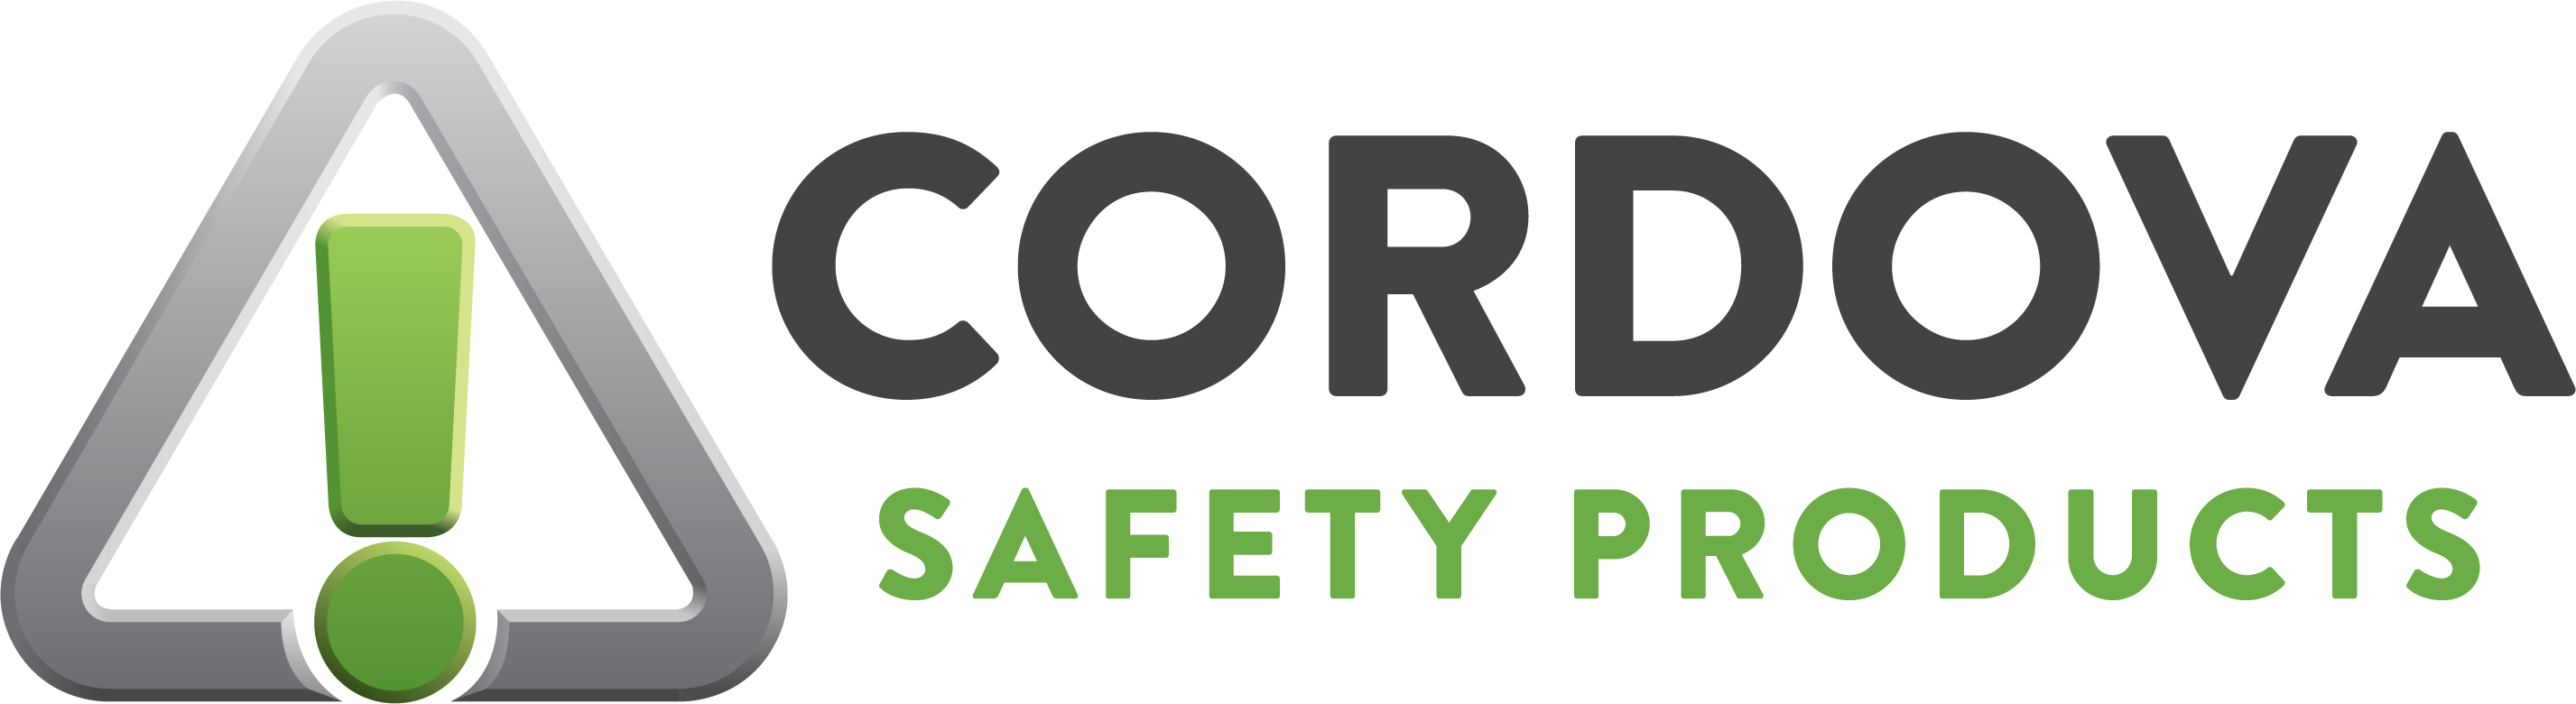 This product's manufacturer is Cordova Safety